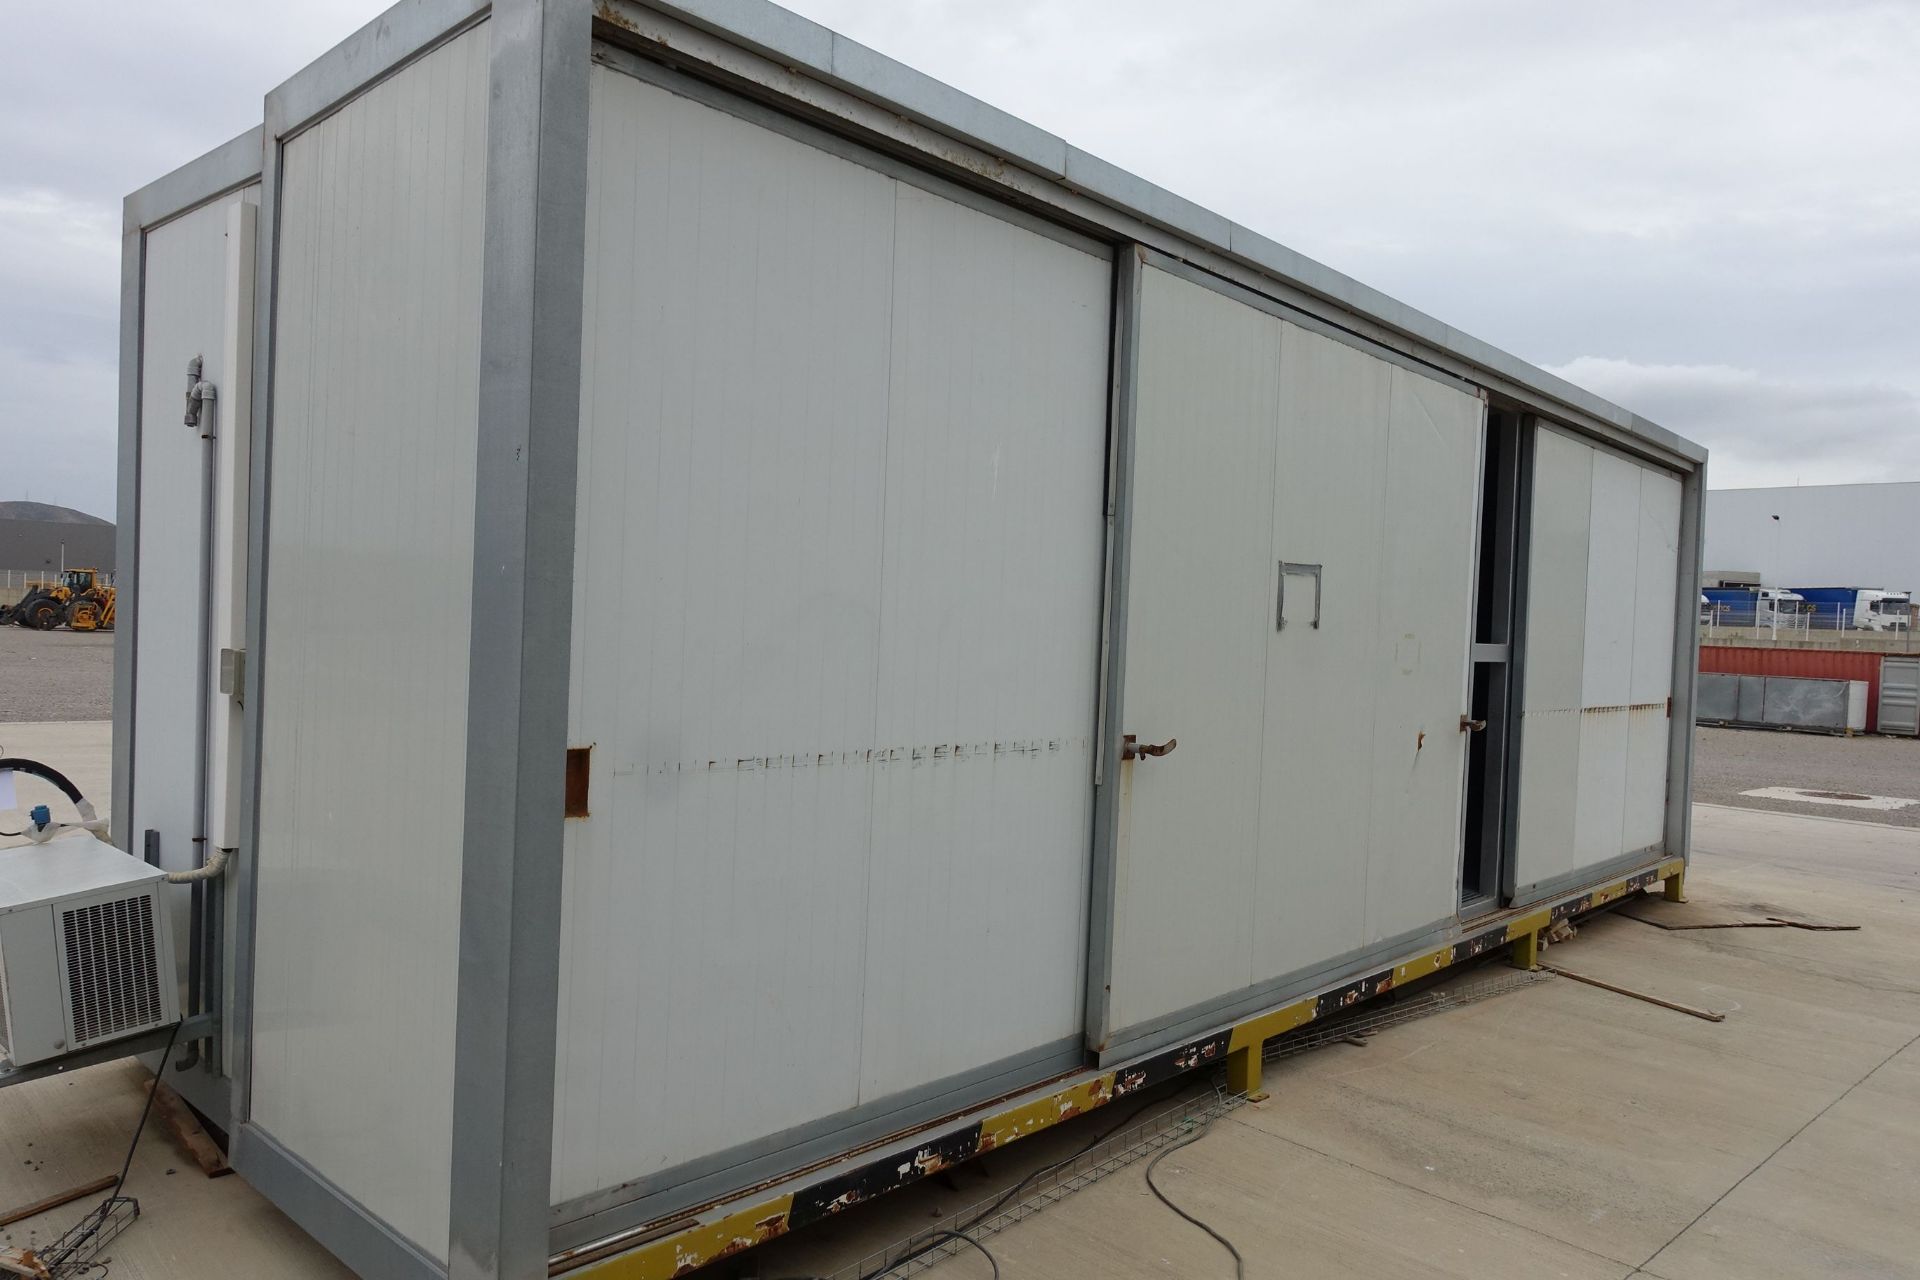 Intracon Chilled Container, 9m Long x 1.5m Deep x 3m High (aproximaely) with MDH-NF-2034A Chiller, - Image 2 of 12